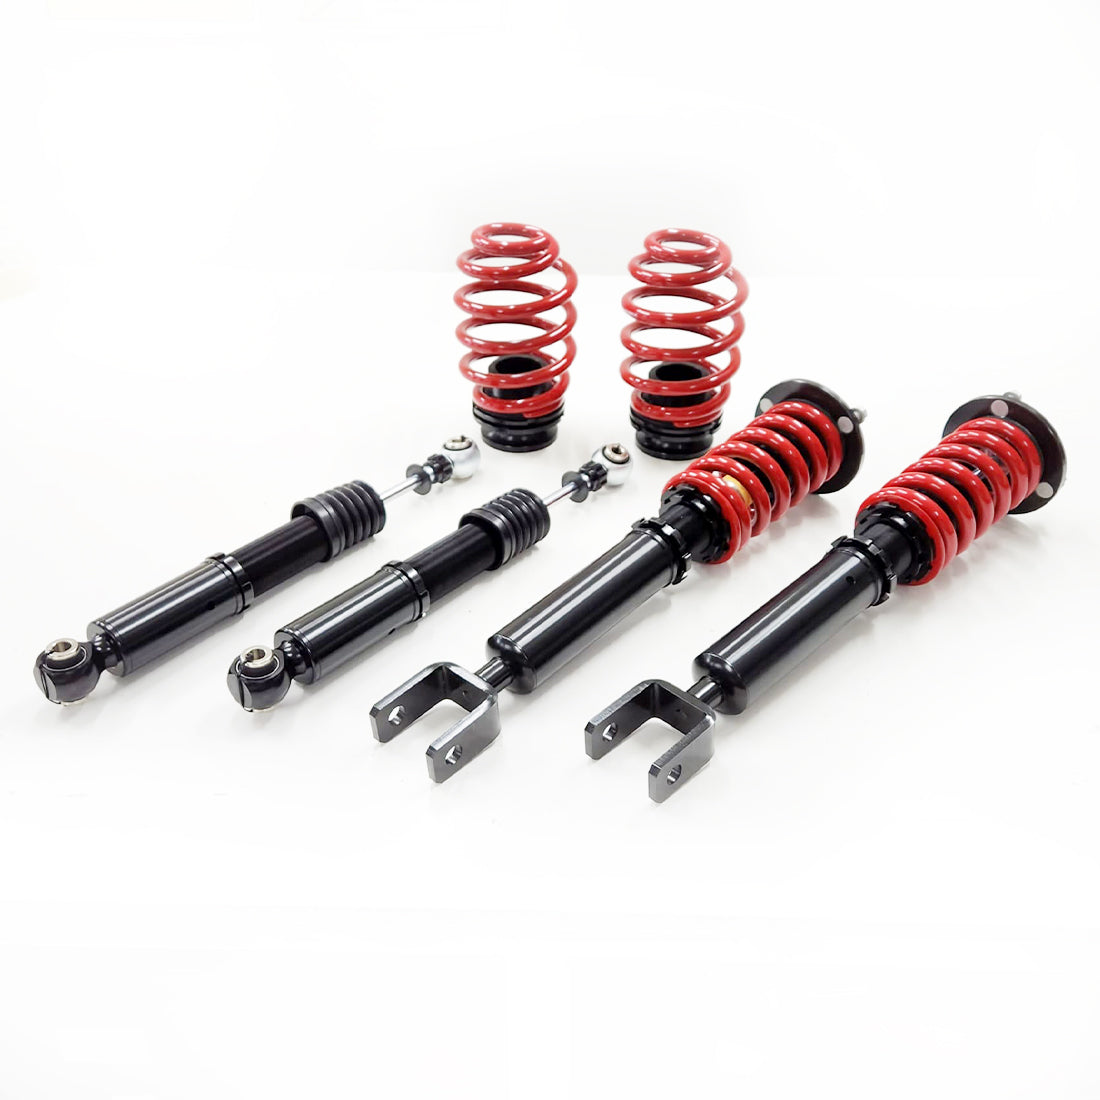 Supashock Ford Falcon Coilovers